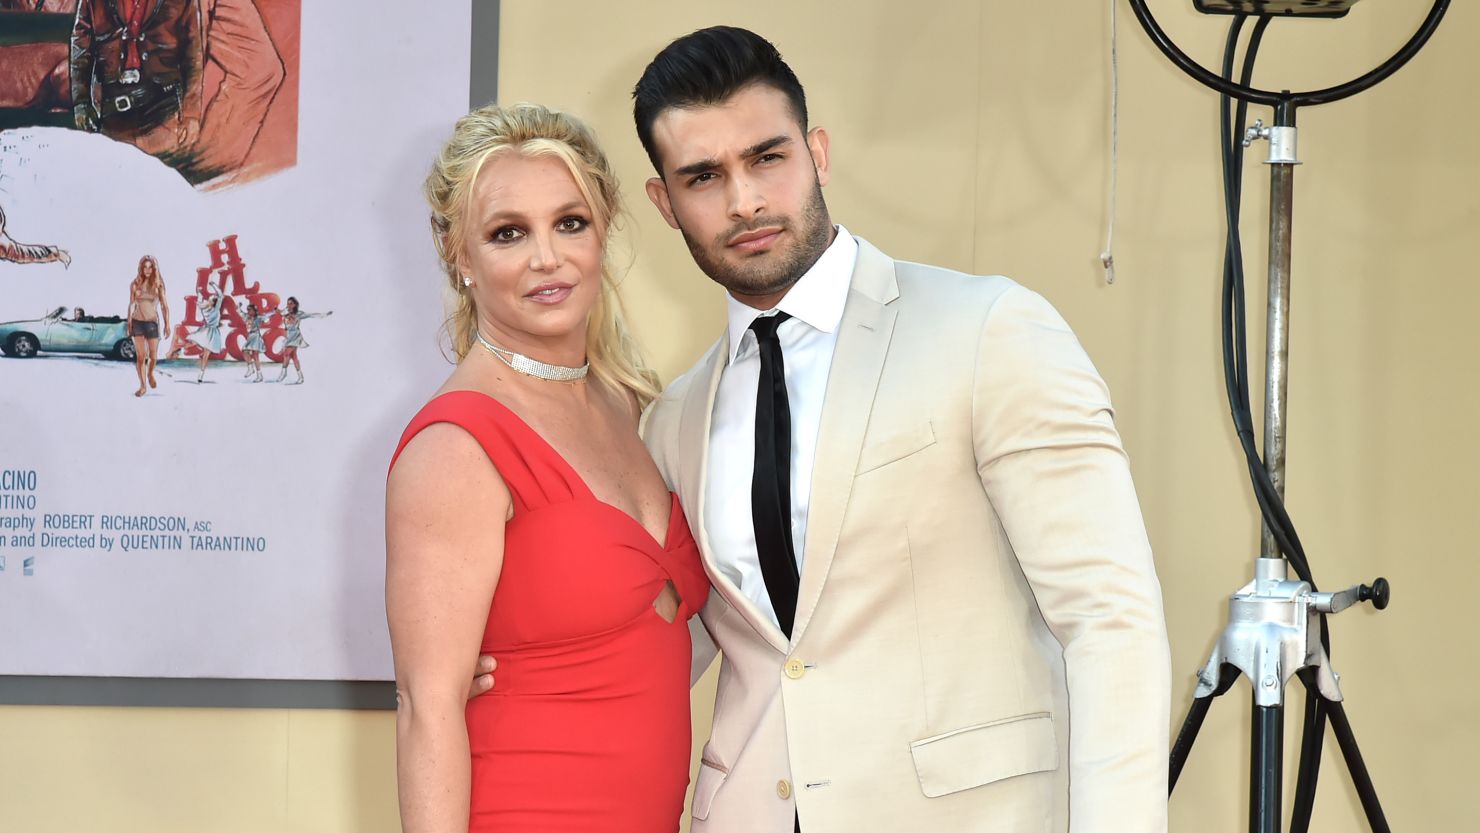 Britney Spears and Sam Asghari at the Los Angeles premiere of "Once Upon A Time In Hollywood" at TCL Chinese Theatre on July 22, 2019 in Hollywood, California. 